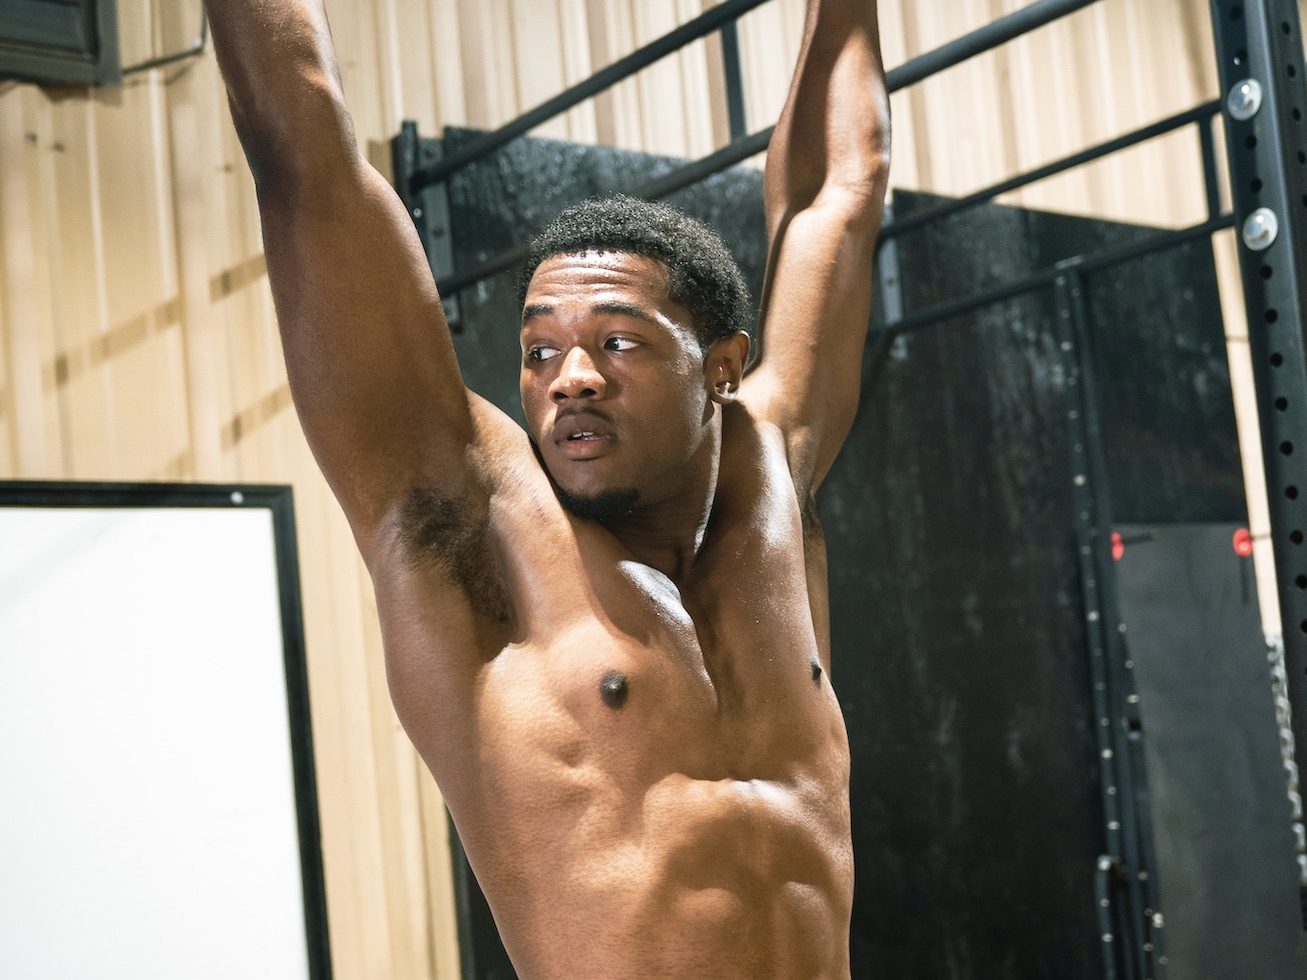 Perfect Plan: Your Pull-Up Skill